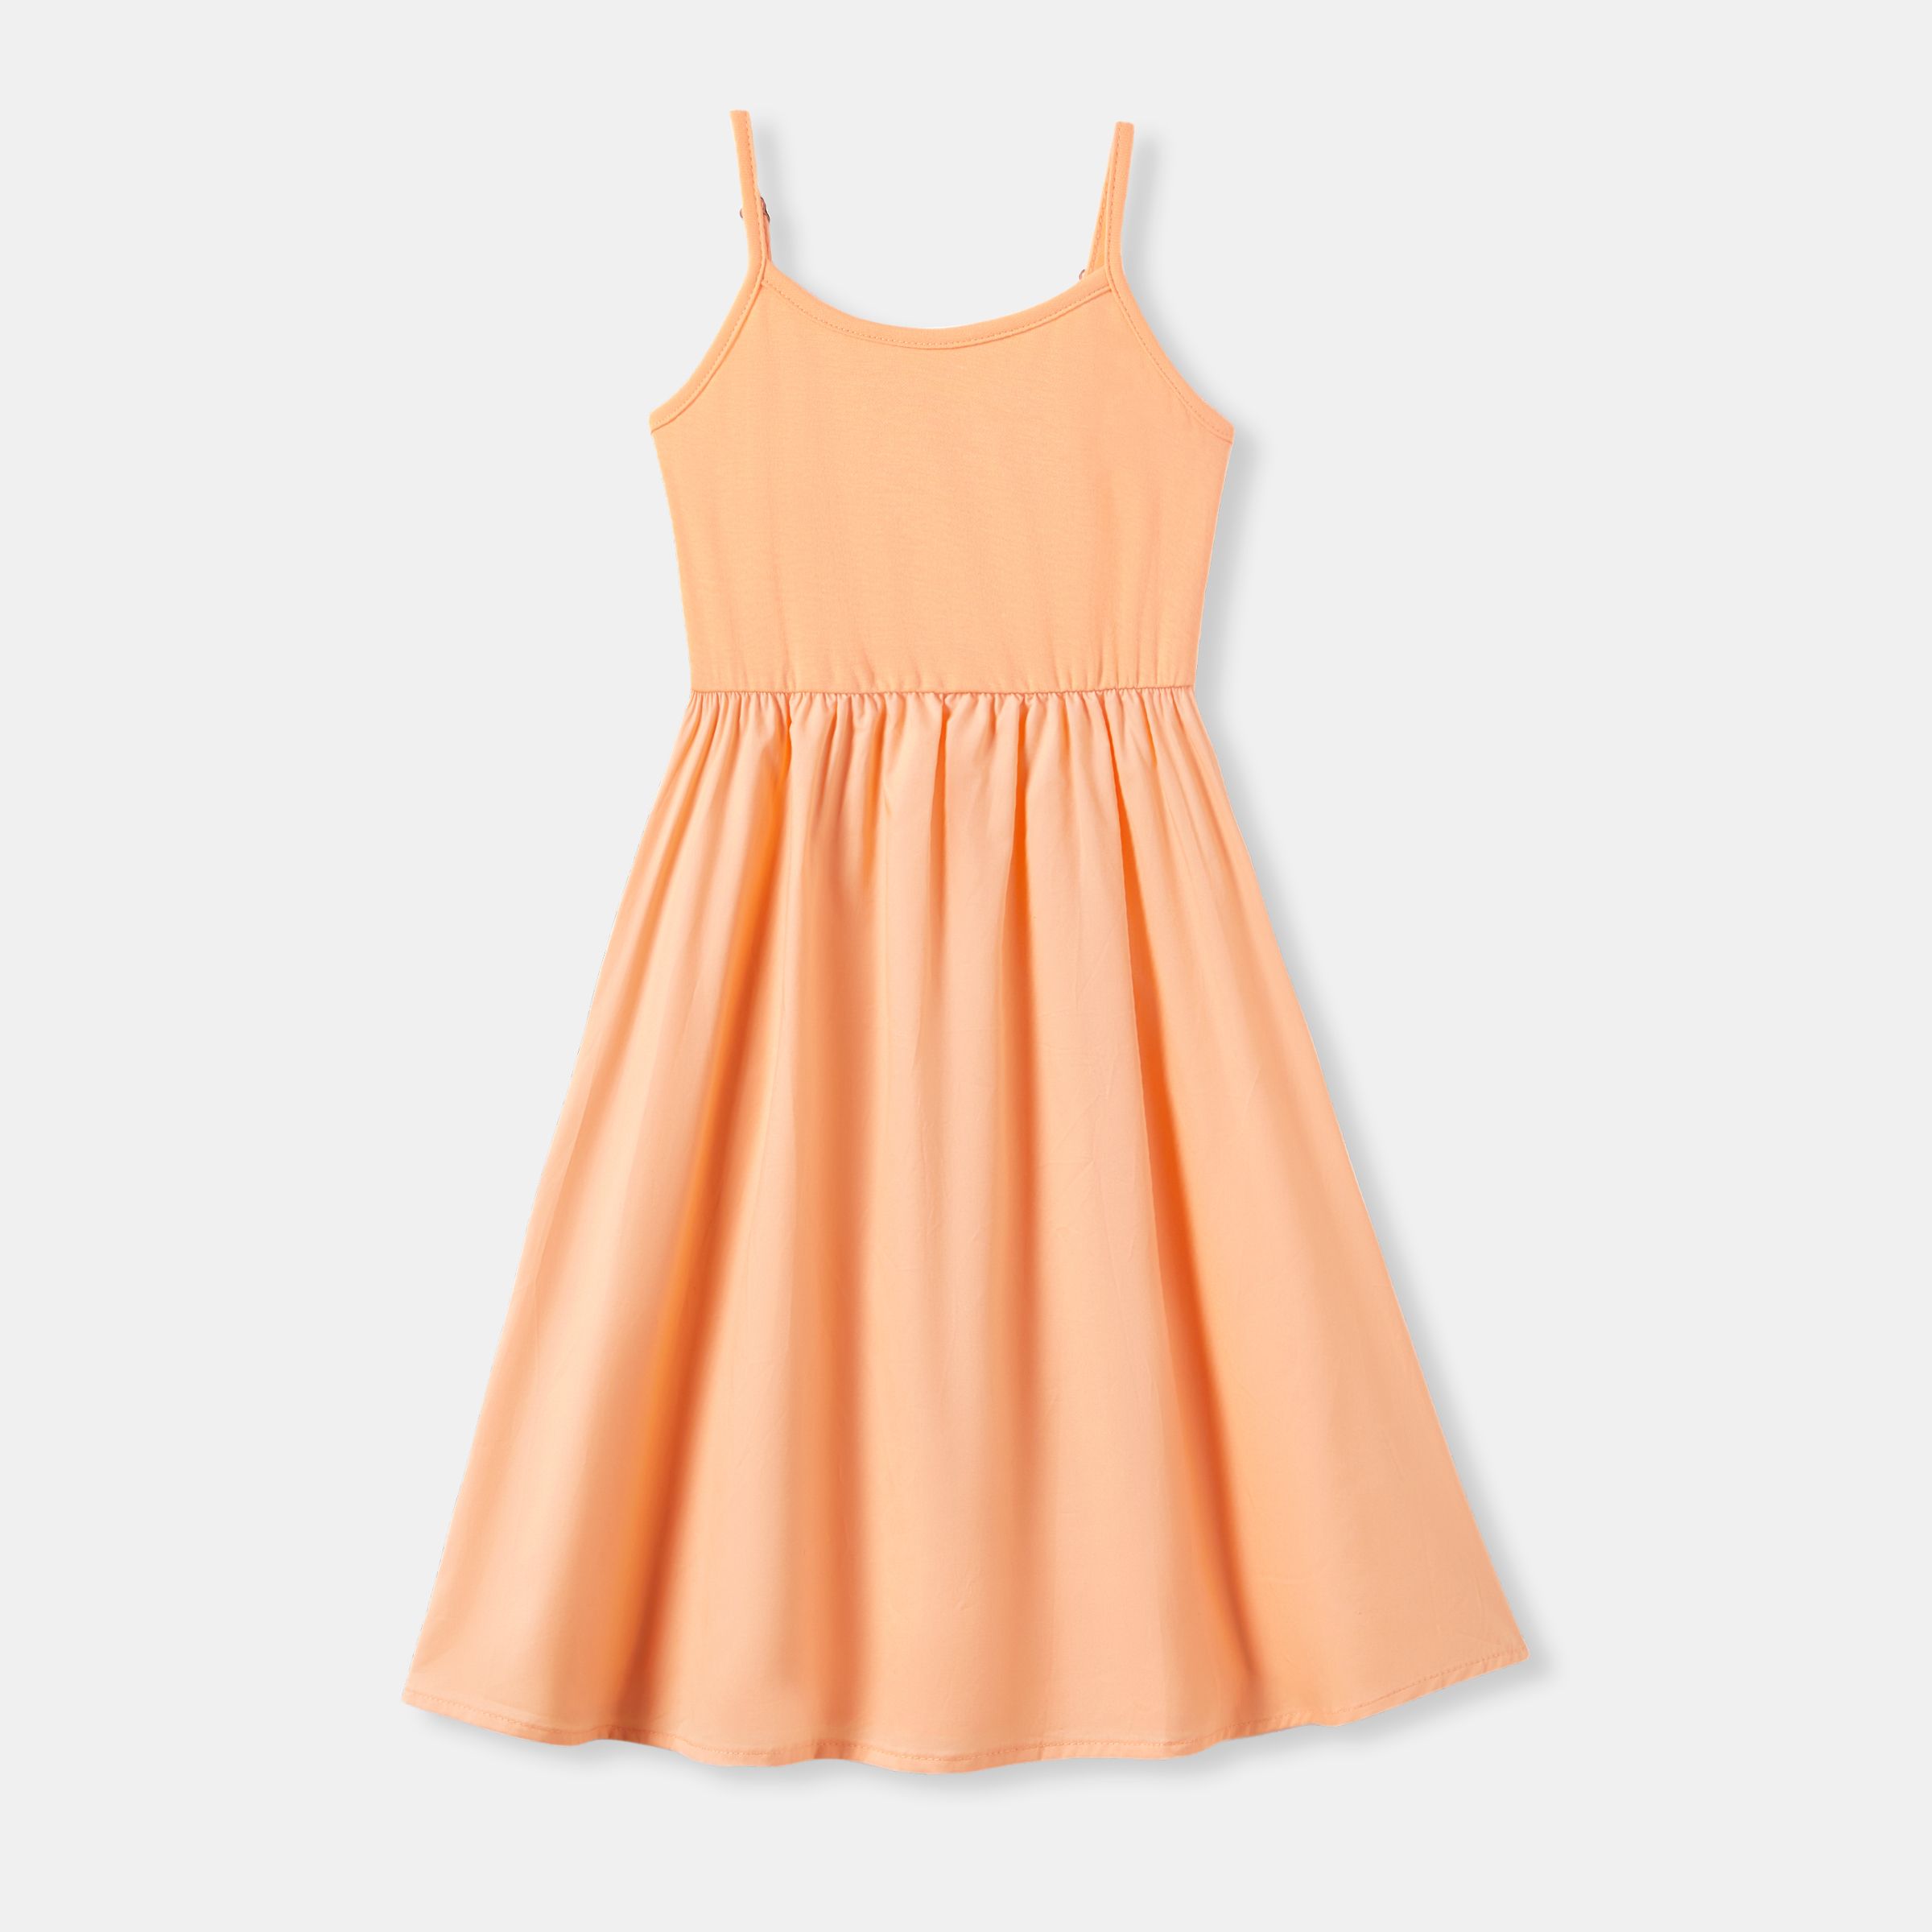 Mommy and Me Orange Cotton Sleeveless A-Line Strap Dress